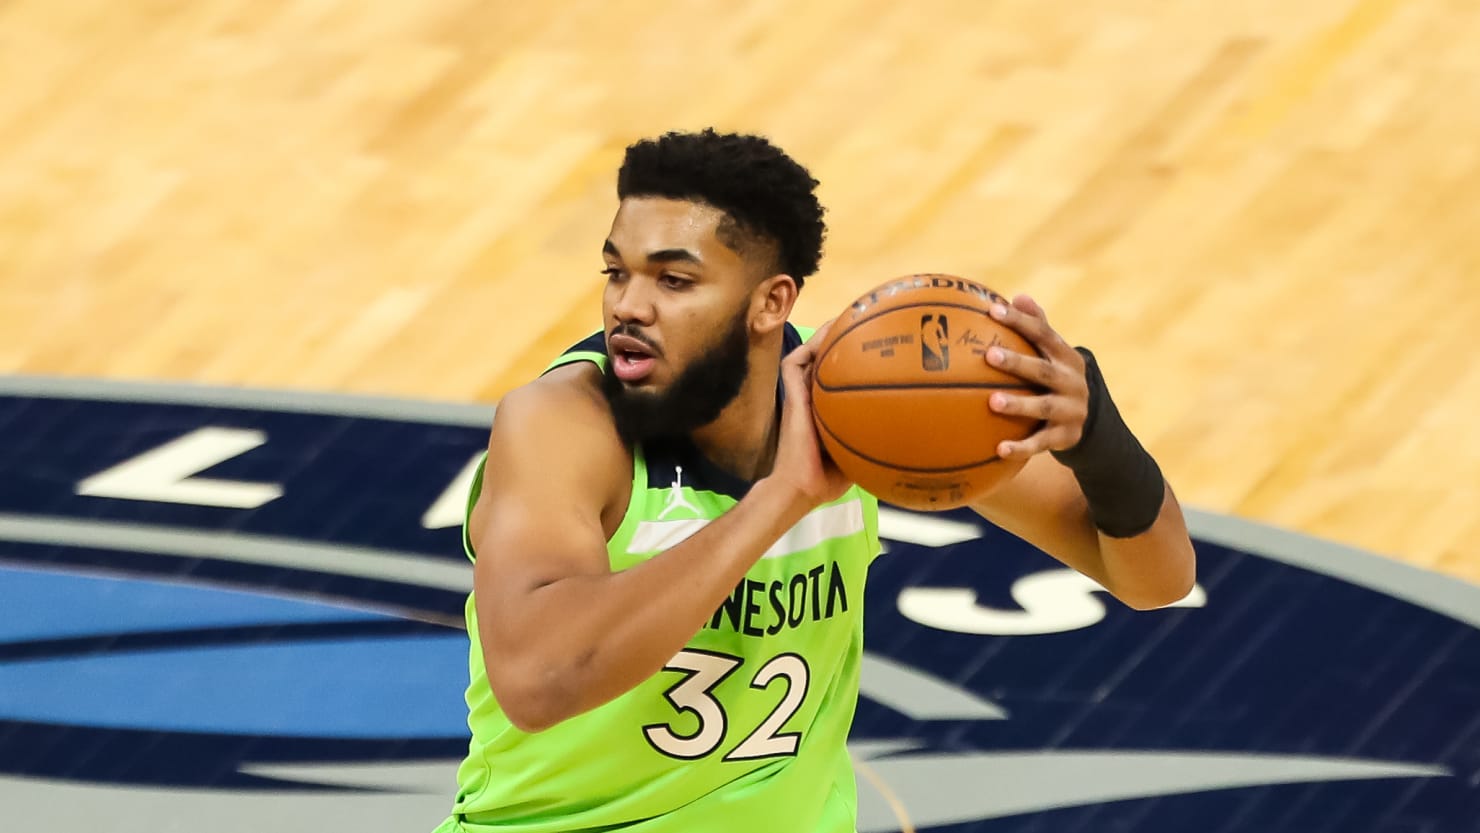 NBA star Karl-Anthony Towns tests positive for the coronavirus